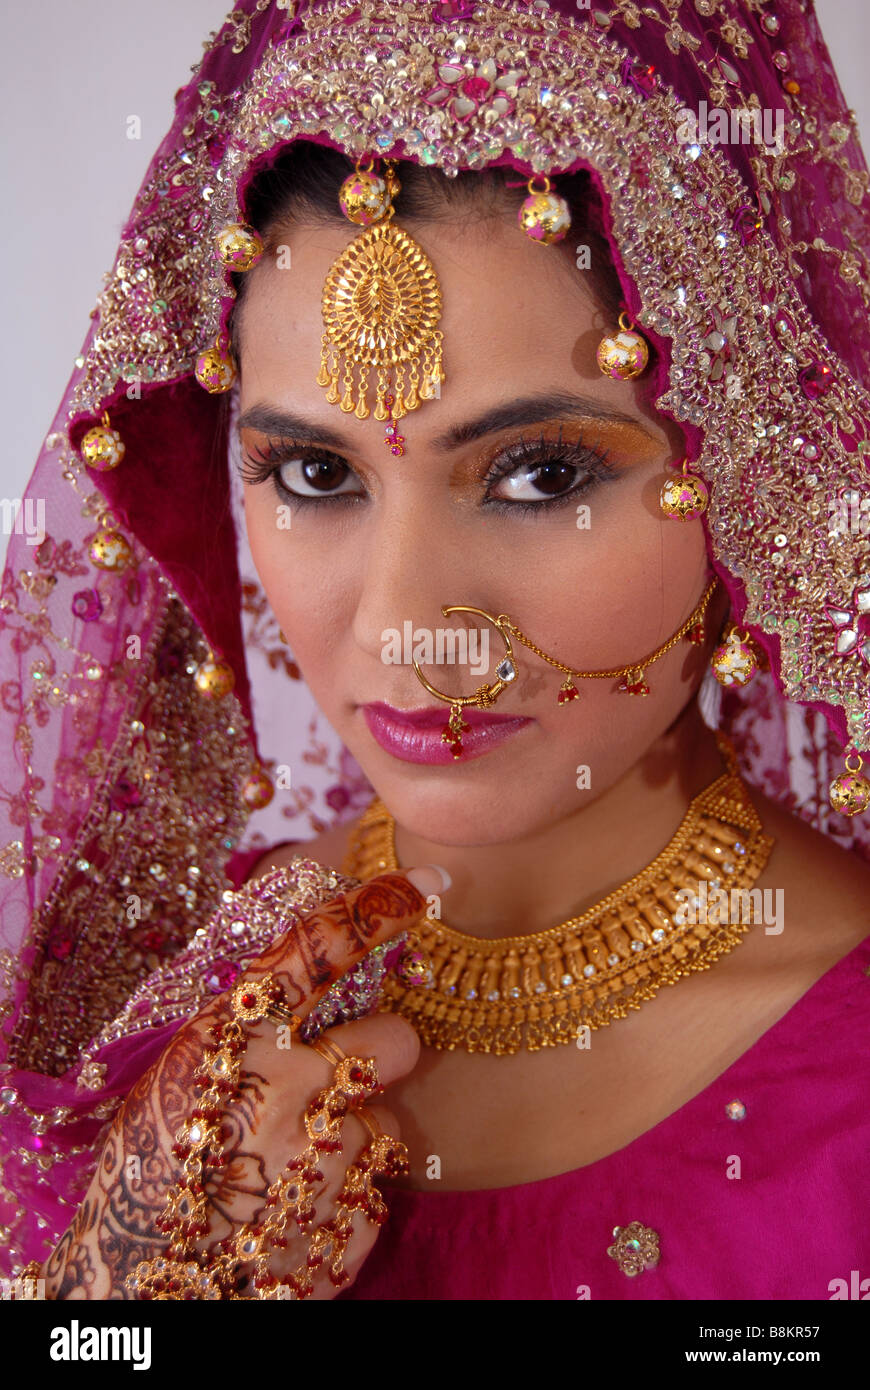 Pretty Asian or Indian Bride wearing a red dress and ornaments Stock Photo